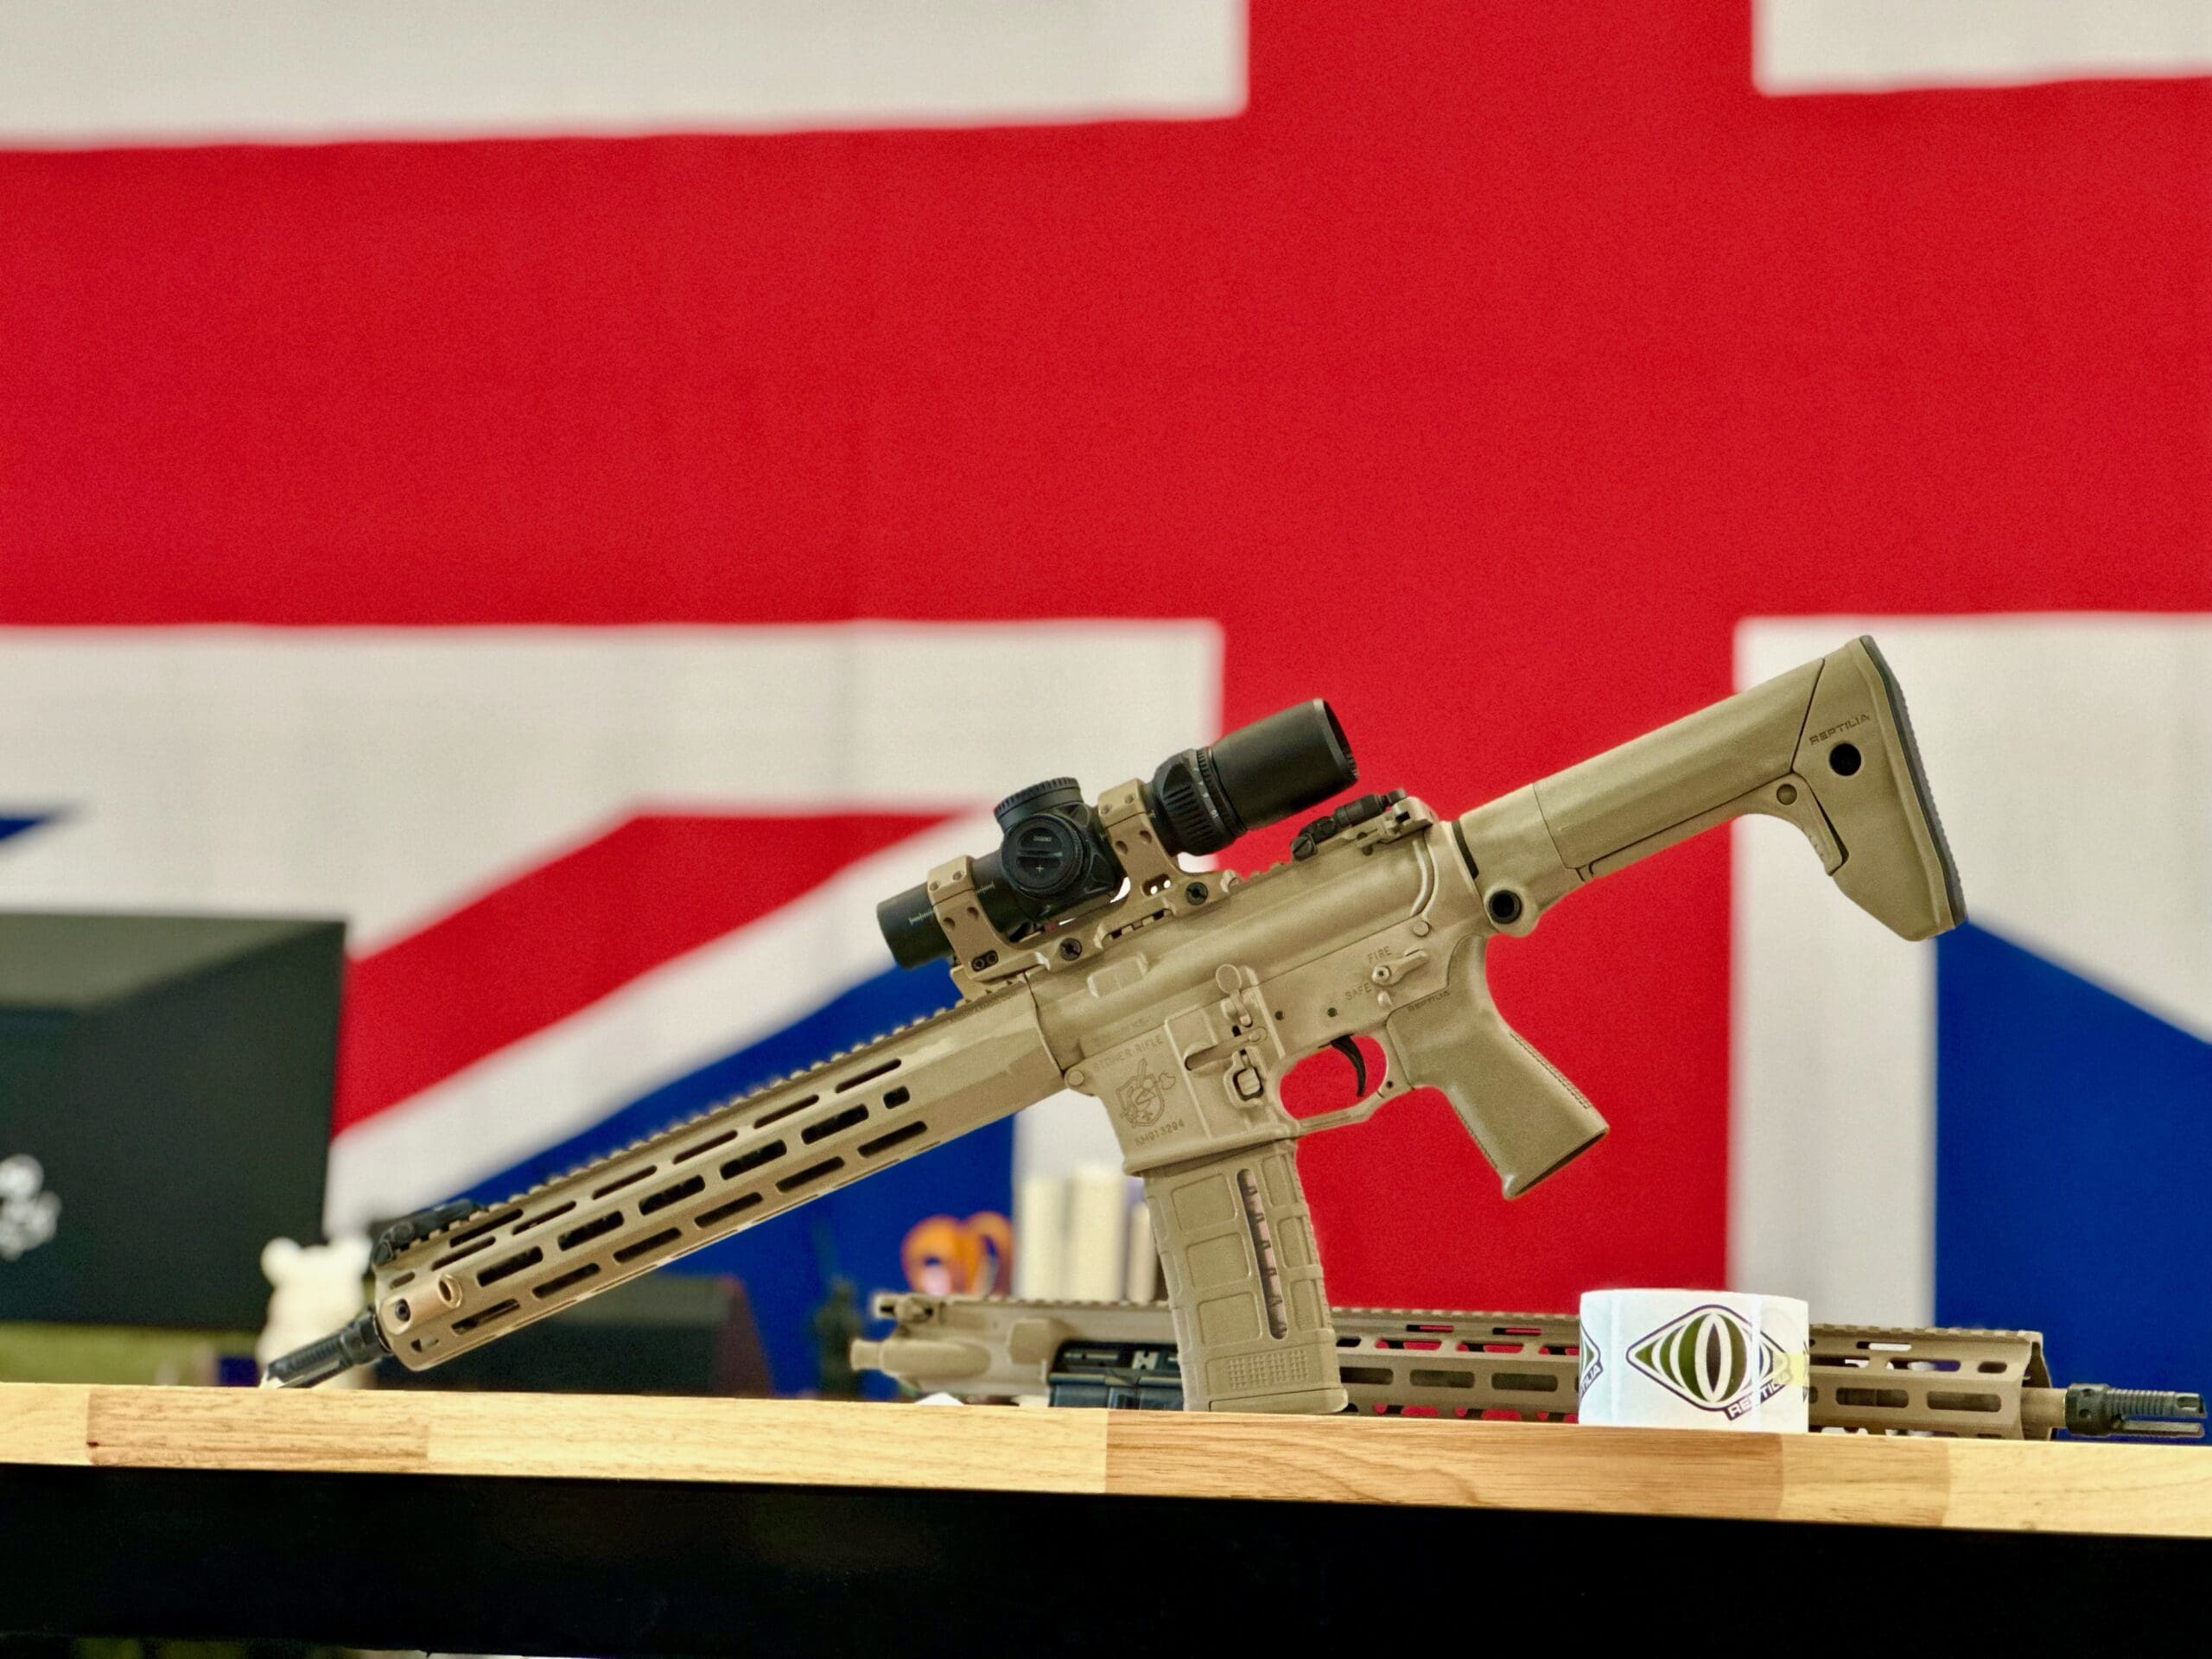 Reptilia Awarded Prestigious Contract to Supply Weapon Accessories for the Alternative Individual Weapon System for the UK MOD